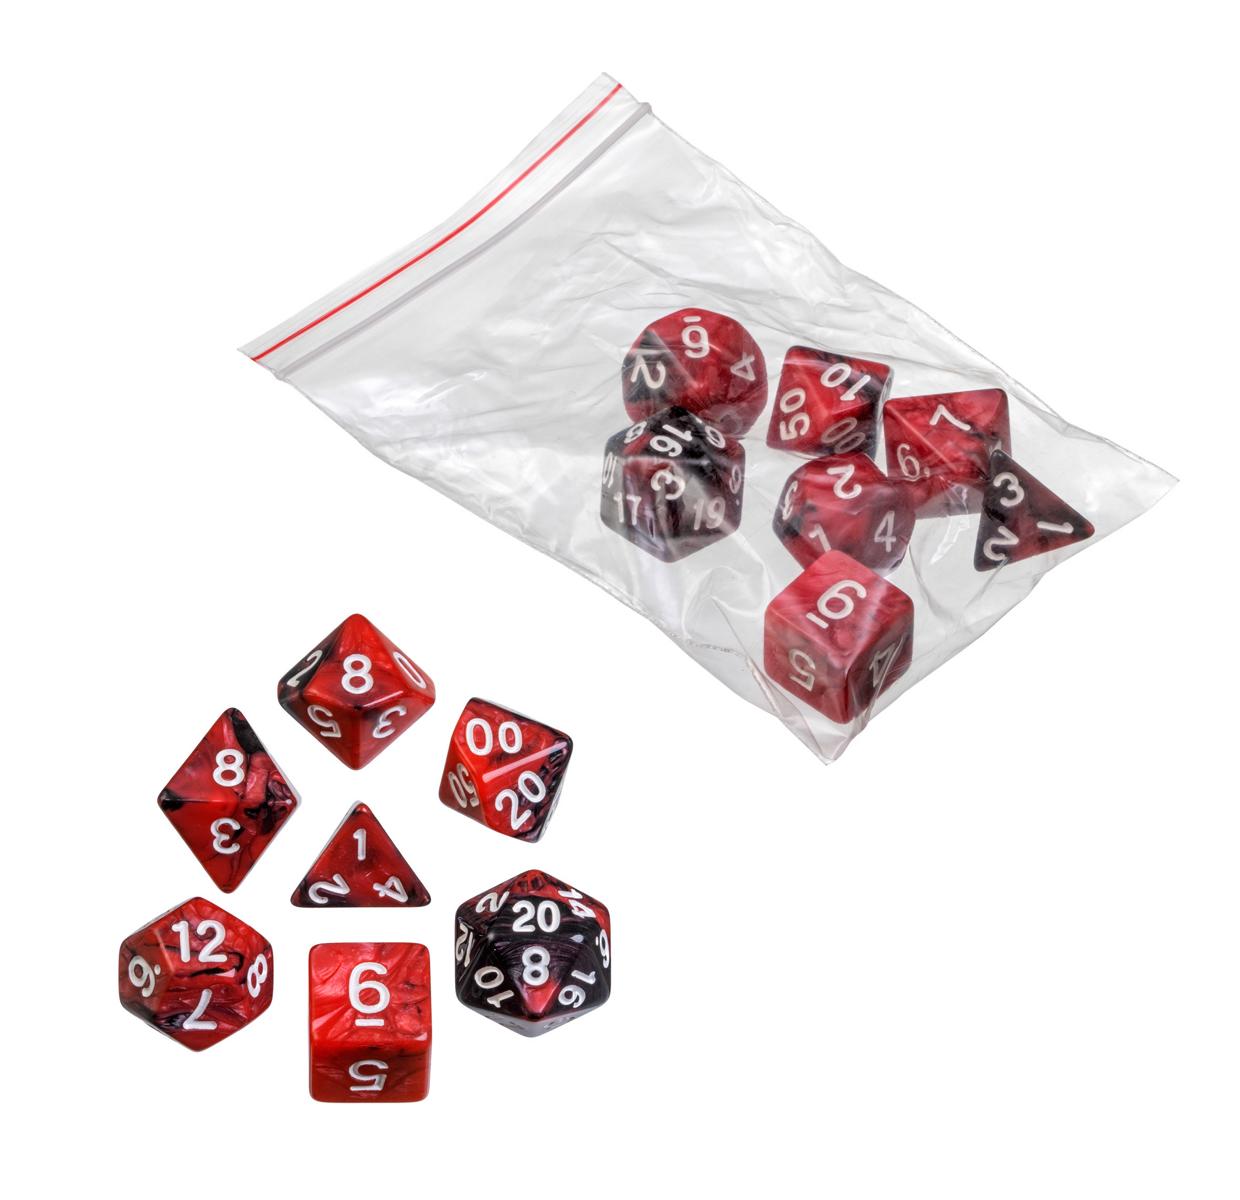 Dice, oblivion, red, 7 pieces in polybag